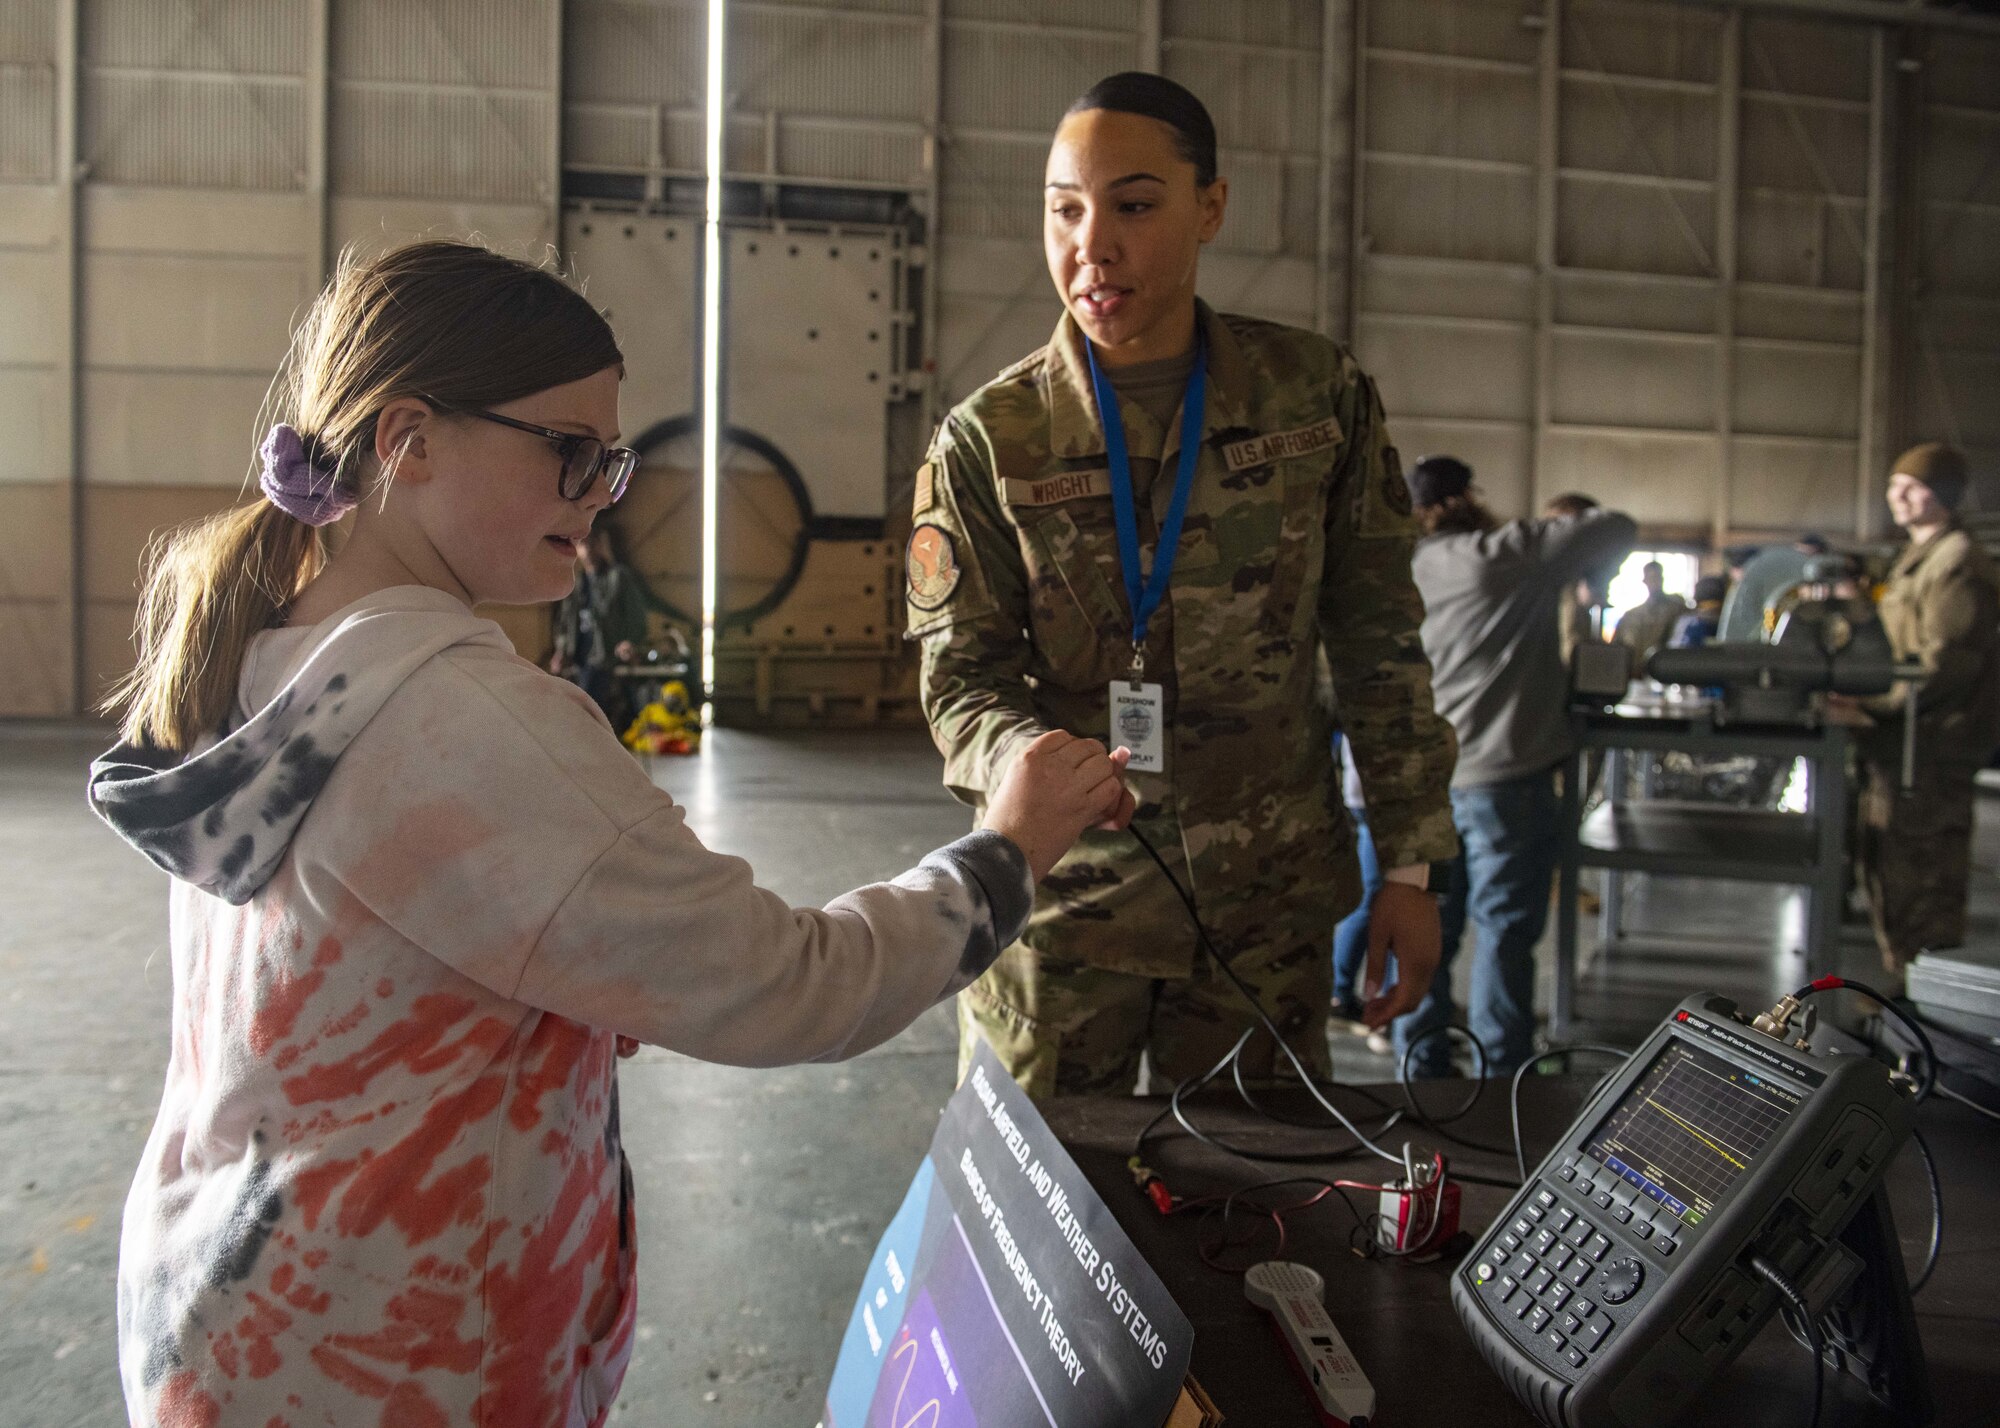 A U.S. Air Force Airman showcases communication equipment to an airshow visitor during the Fairchild Skyfest 2022 at Fairchild Air Force Base, Washington, May 15, 2022. Fairchild Skyfest 2022 offered a unique view of Team Fairchild's role in enabling Rapid Global Mobility for the U.S. Air Force. (U.S. Air Force photo by Staff Sgt. Lawrence Sena)